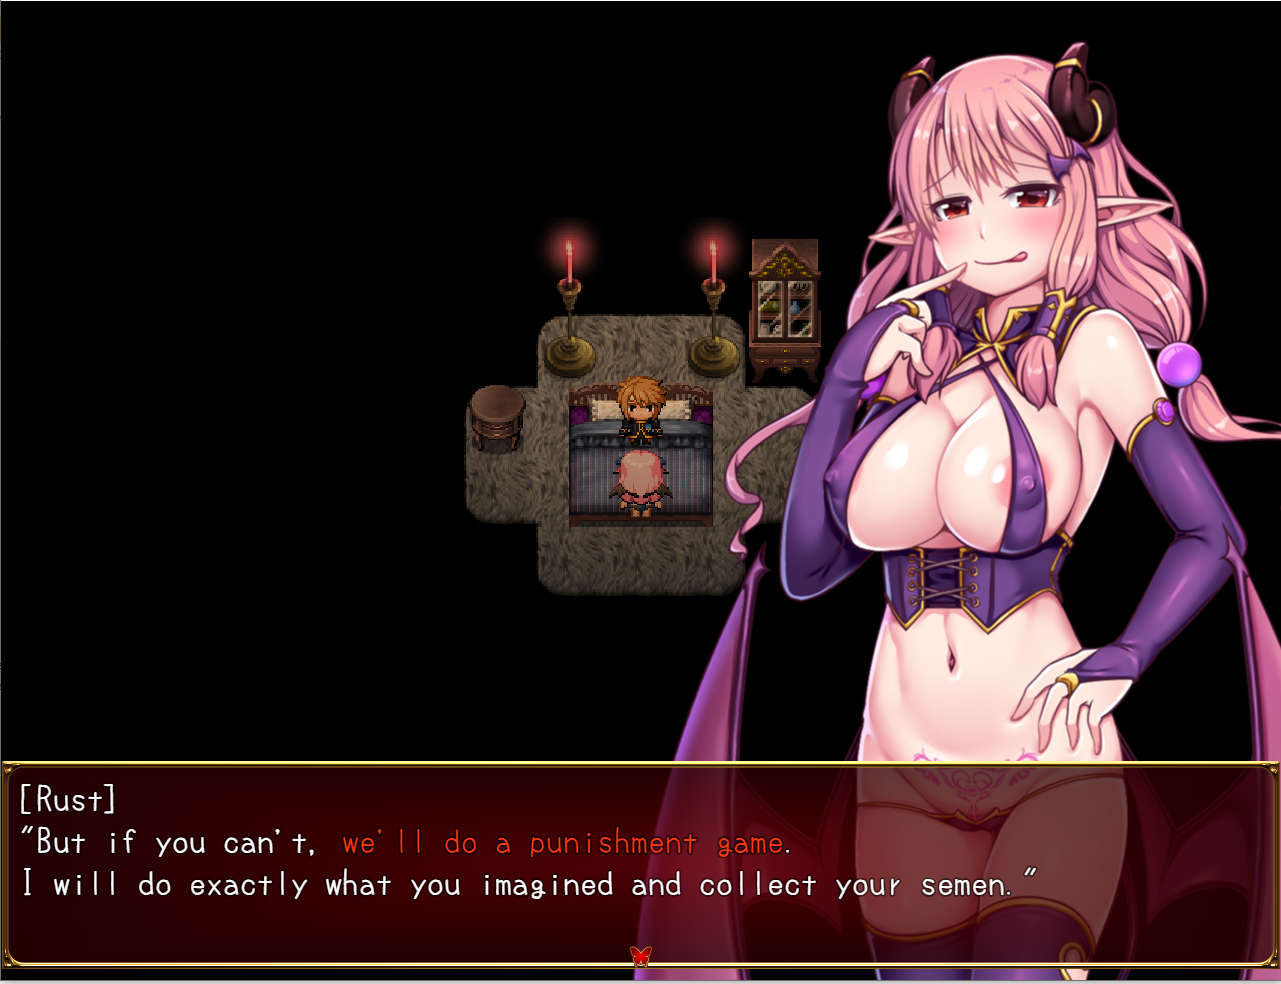 Succubus game translated first dream.